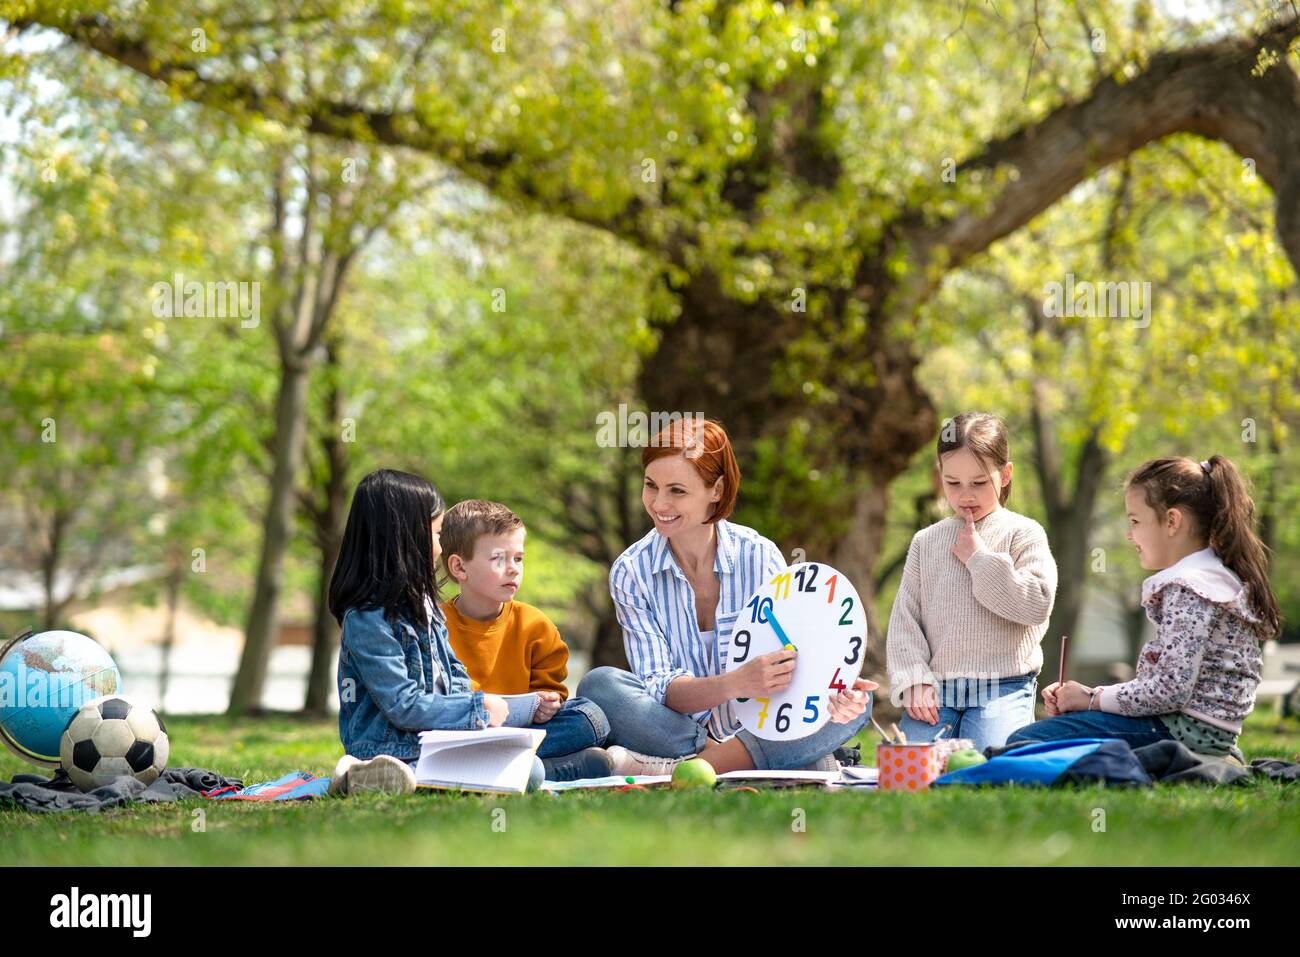 Teacher with small children sitting outdoors in city park, learning group education concept. Stock Photo